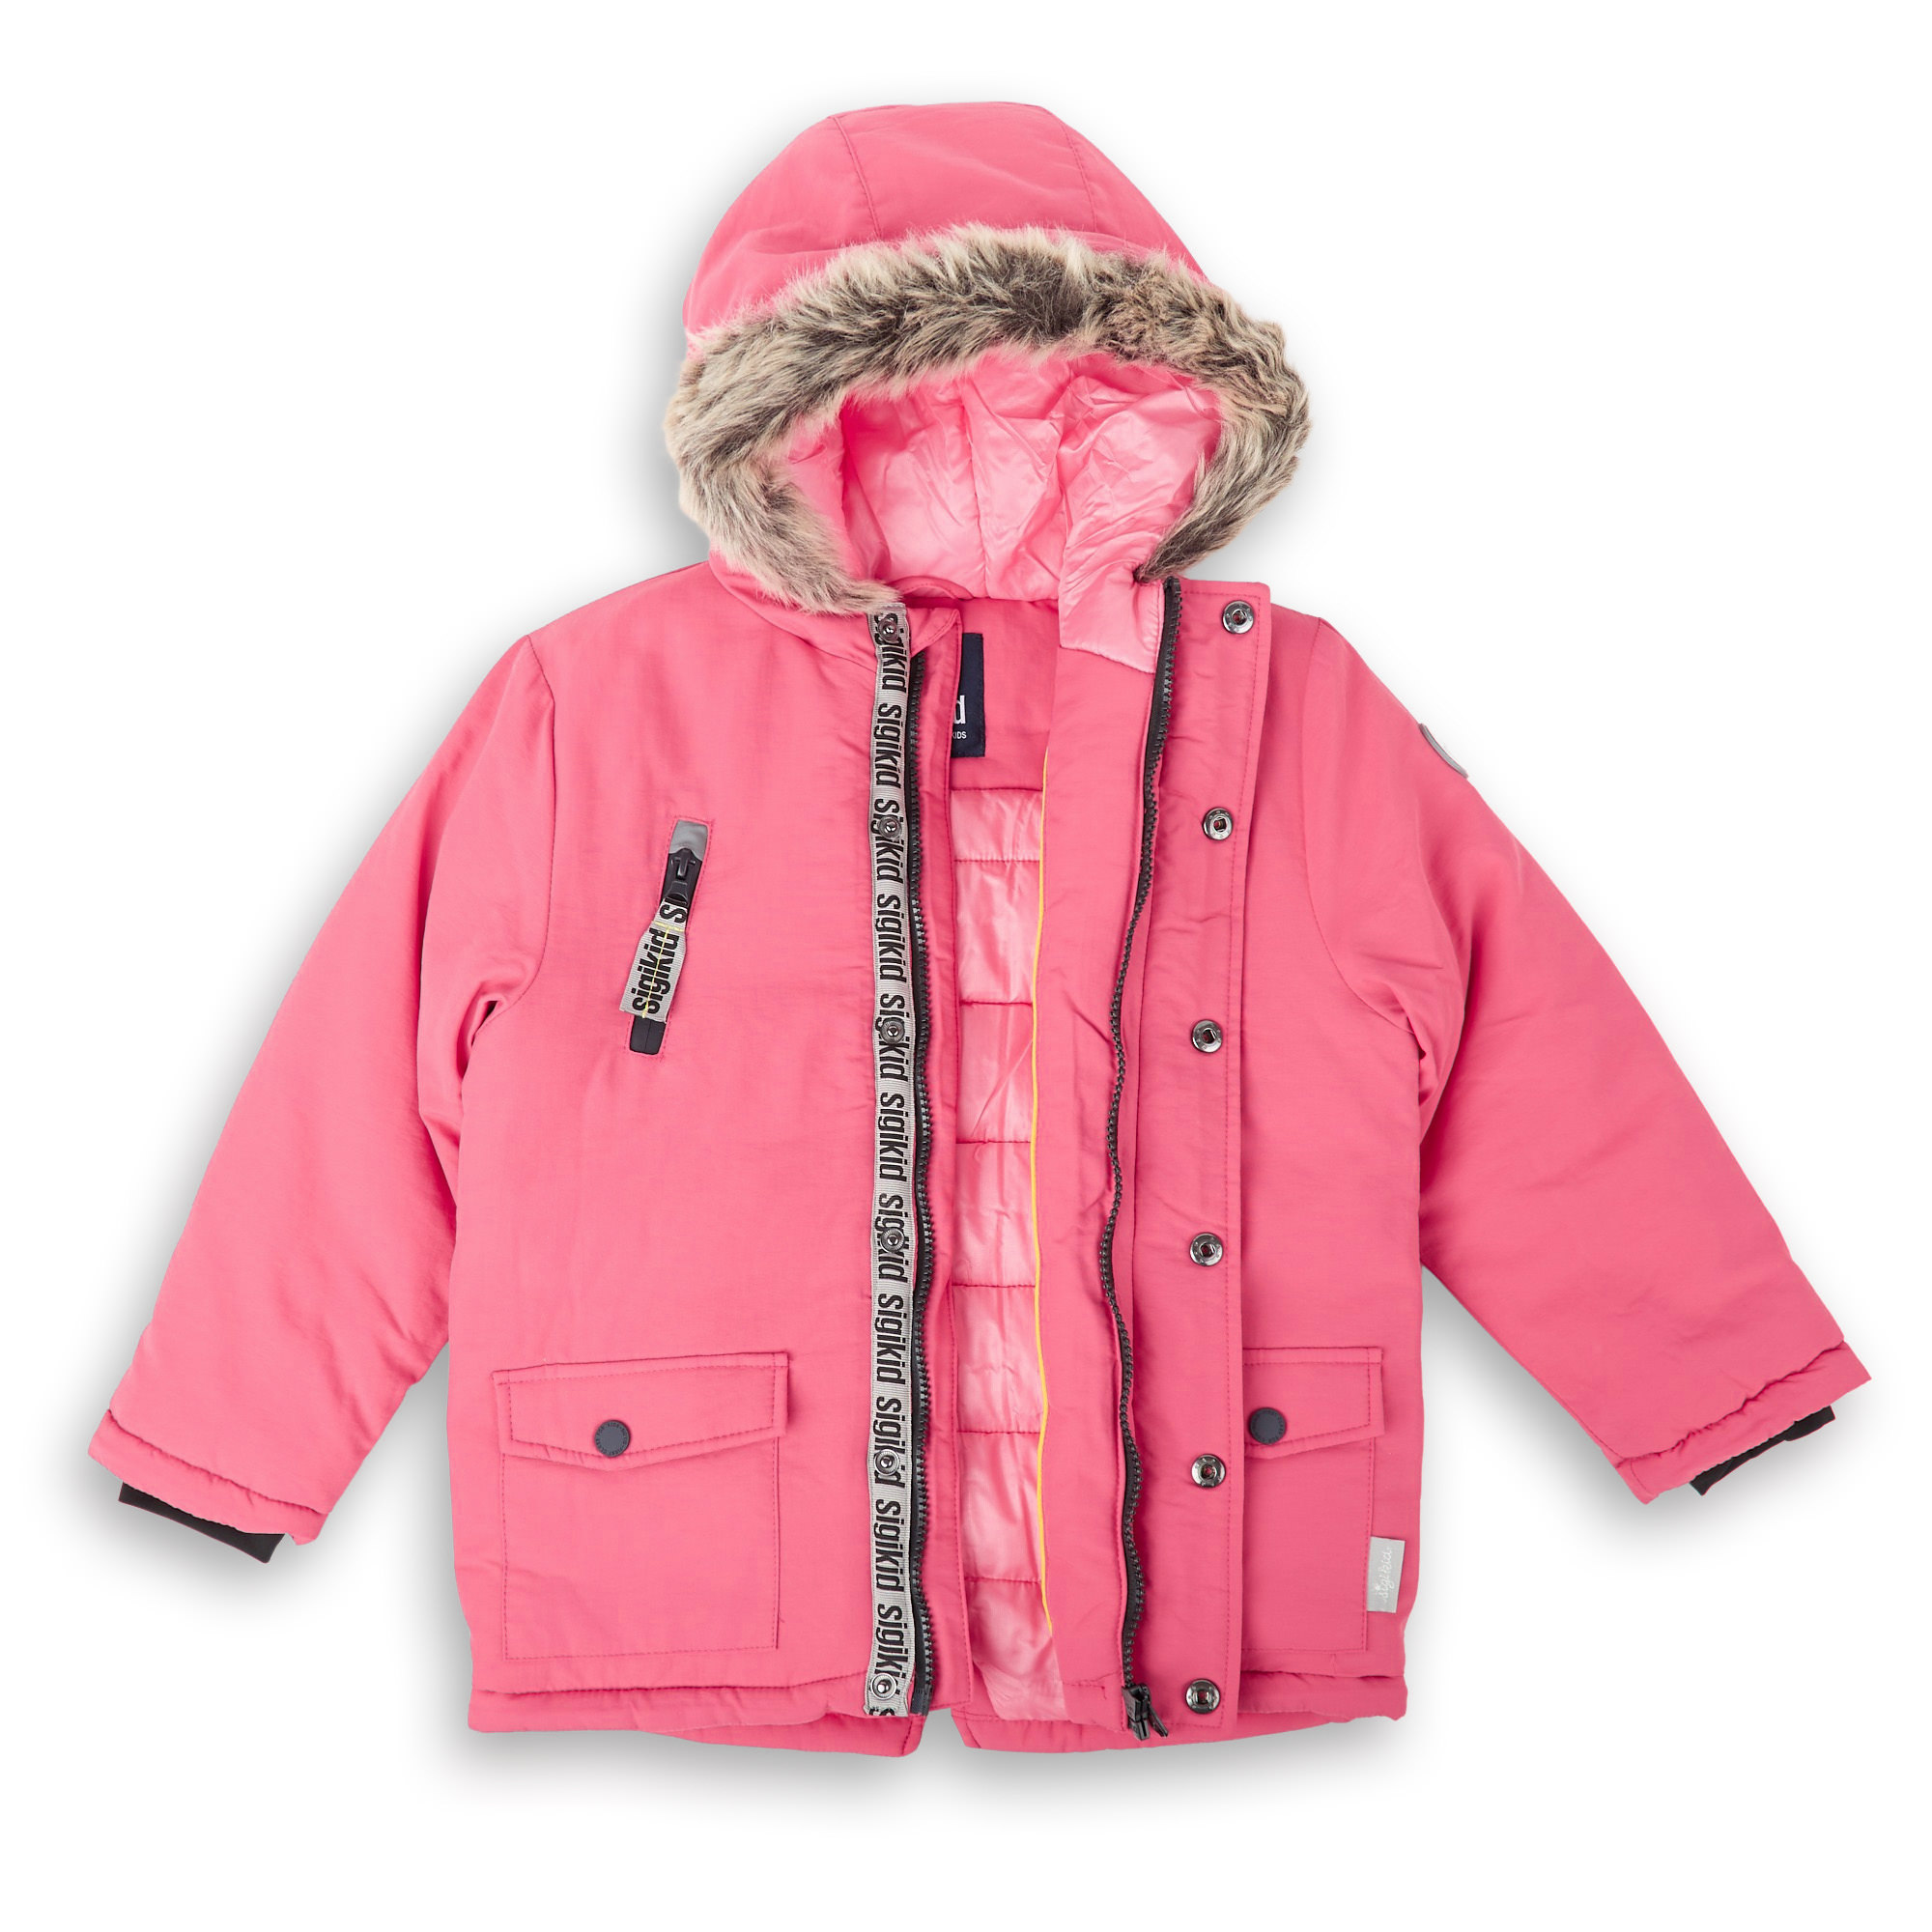 Insulated girls' winter jacket, hooded, pink